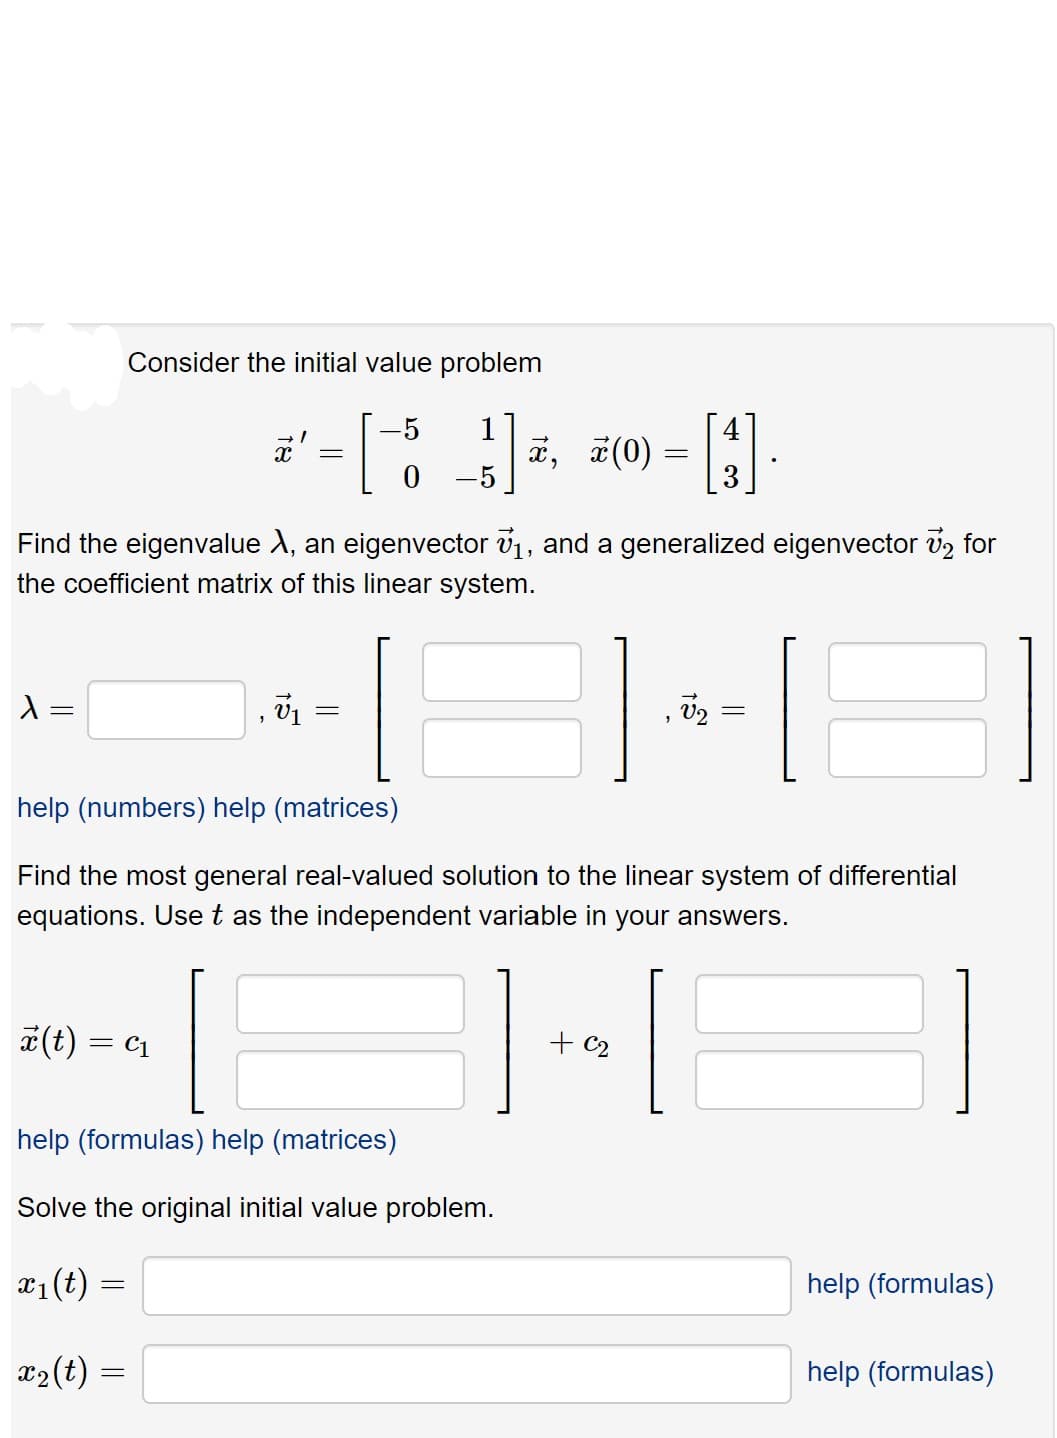 Consider the initial value problem
-5
1
4
¤ (0)
0 -5
Find the eigenvalue X, an eigenvector v1, and a generalized eigenvector v2 for
the coefficient matrix of this linear system.
help (numbers) help (matrices)
Fi
th
most general real-valued solution to the linear system
differential
equations. Uset as the independent variable in your answers.
*(t)
= C1
+ c2
help (formulas) help (matrices)
Solve the original initial value problem.
x1(t) =
help (formulas)
x2(t)
help (formulas)
